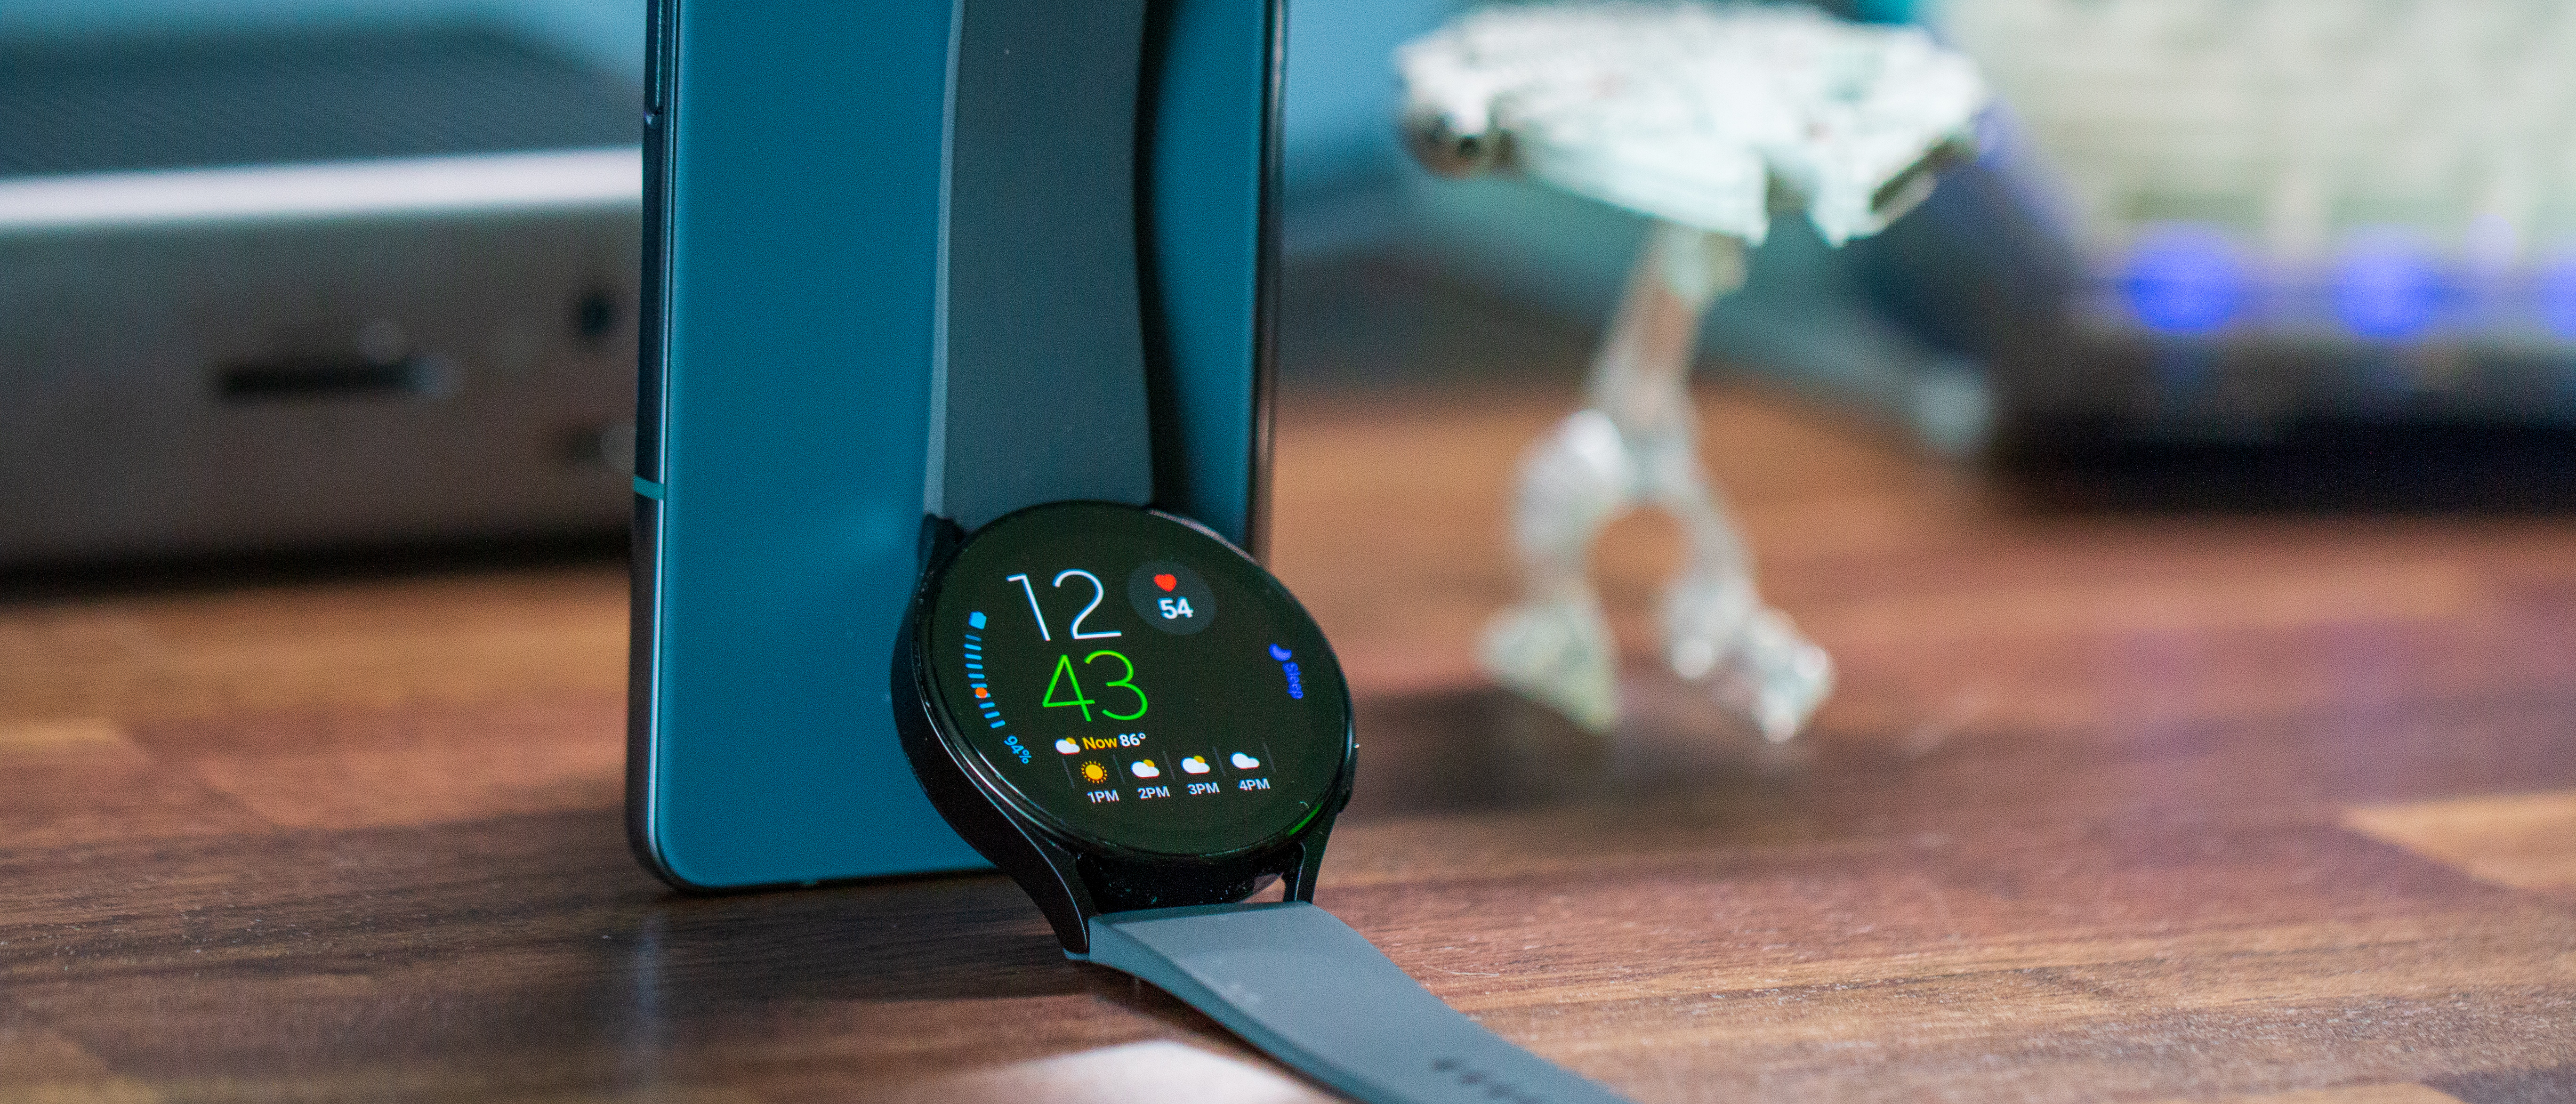 Samsung Galaxy Watch 5 Review: Android's Best - Reviewed